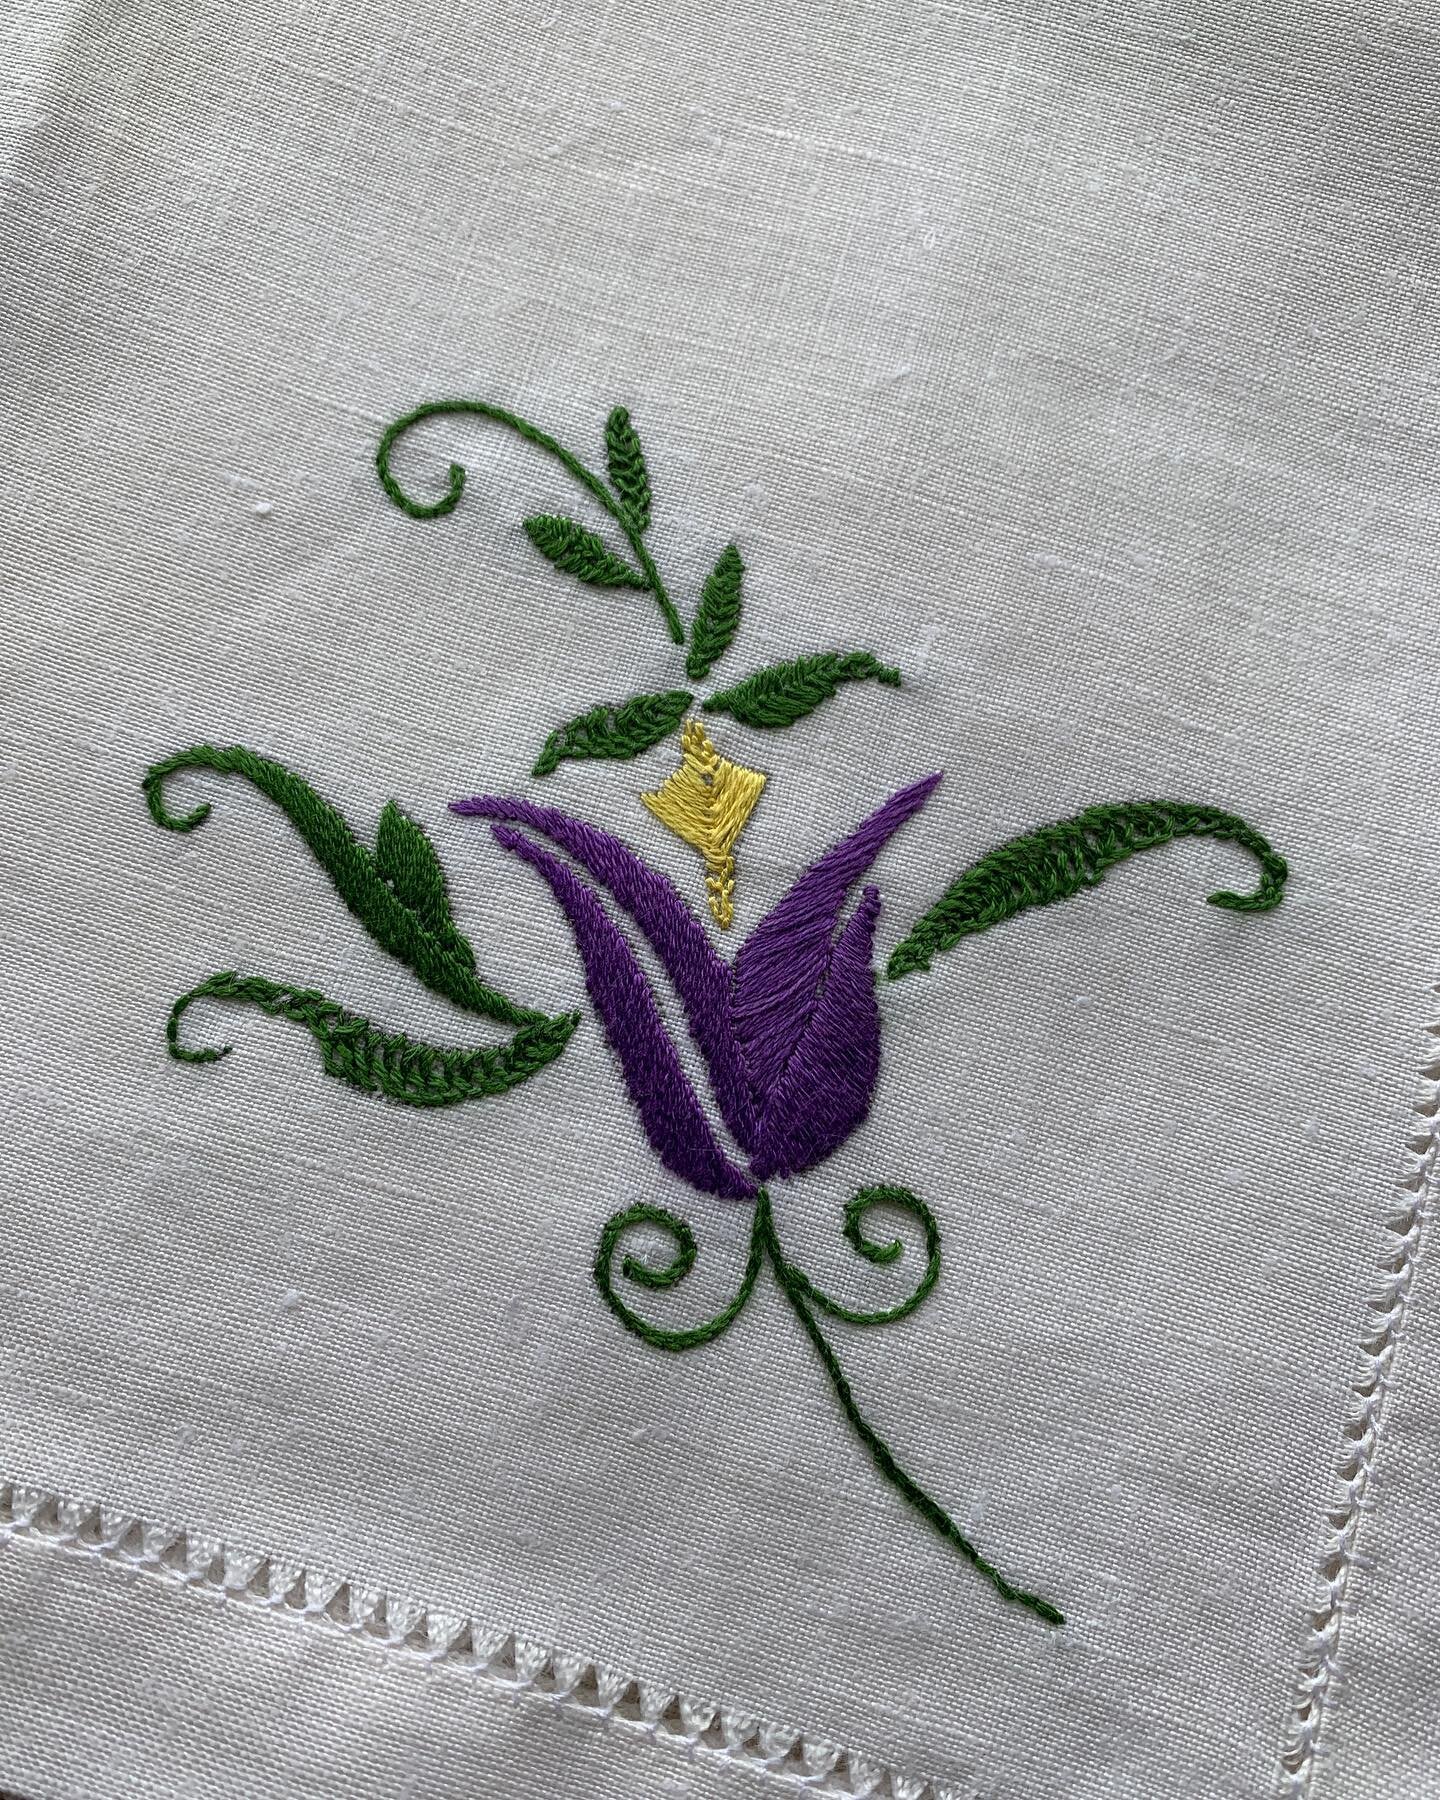 One of our group members was given these napkins as the embroidery hadn't been finished.  She was happy to complete the design and add her own elaboration. 

These napkins are vintage and so have a few minor marks.  A lovely addition to the dinner ta